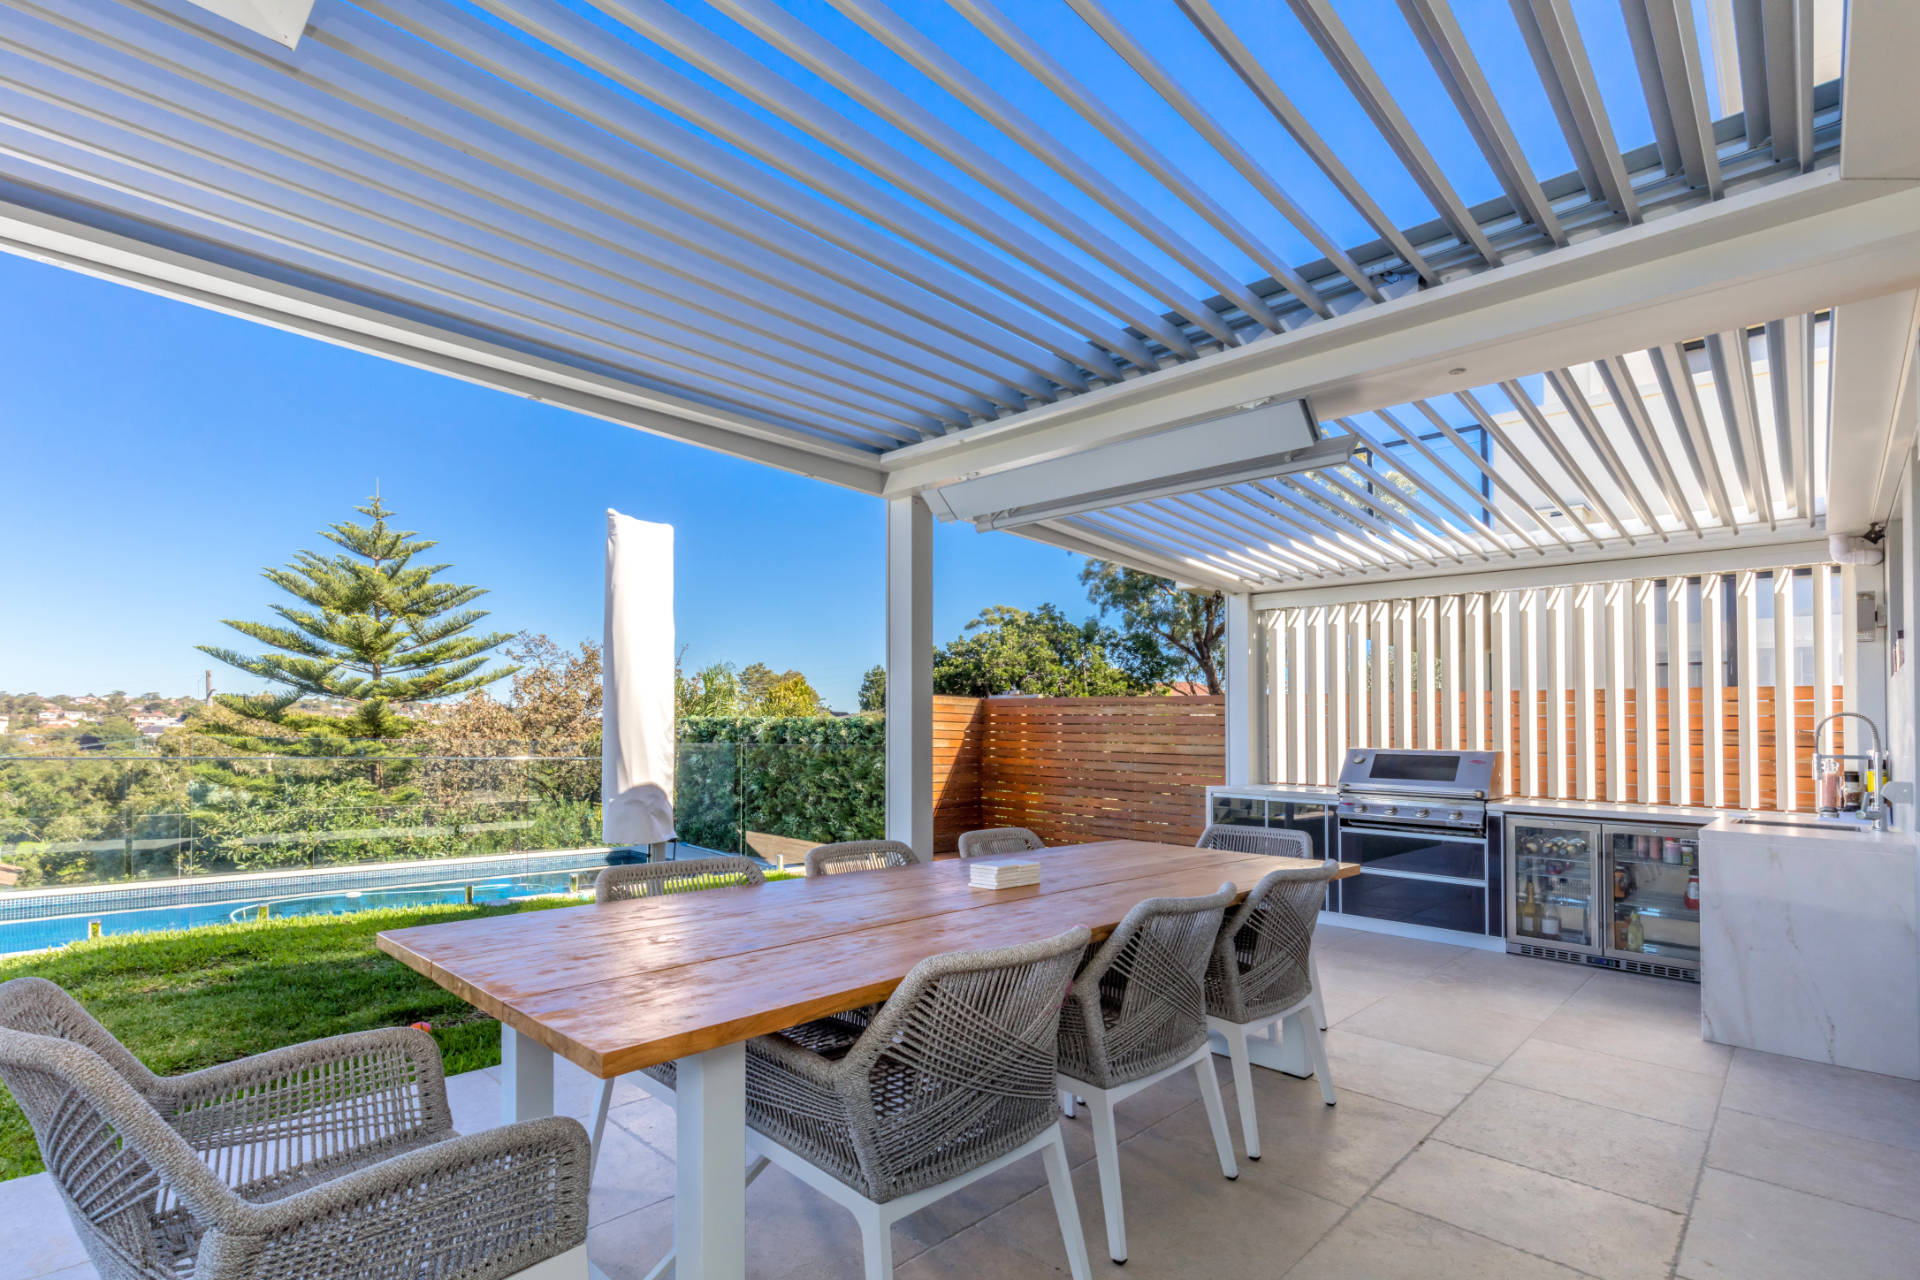 Side privacy screen on Manly Vale pergola.